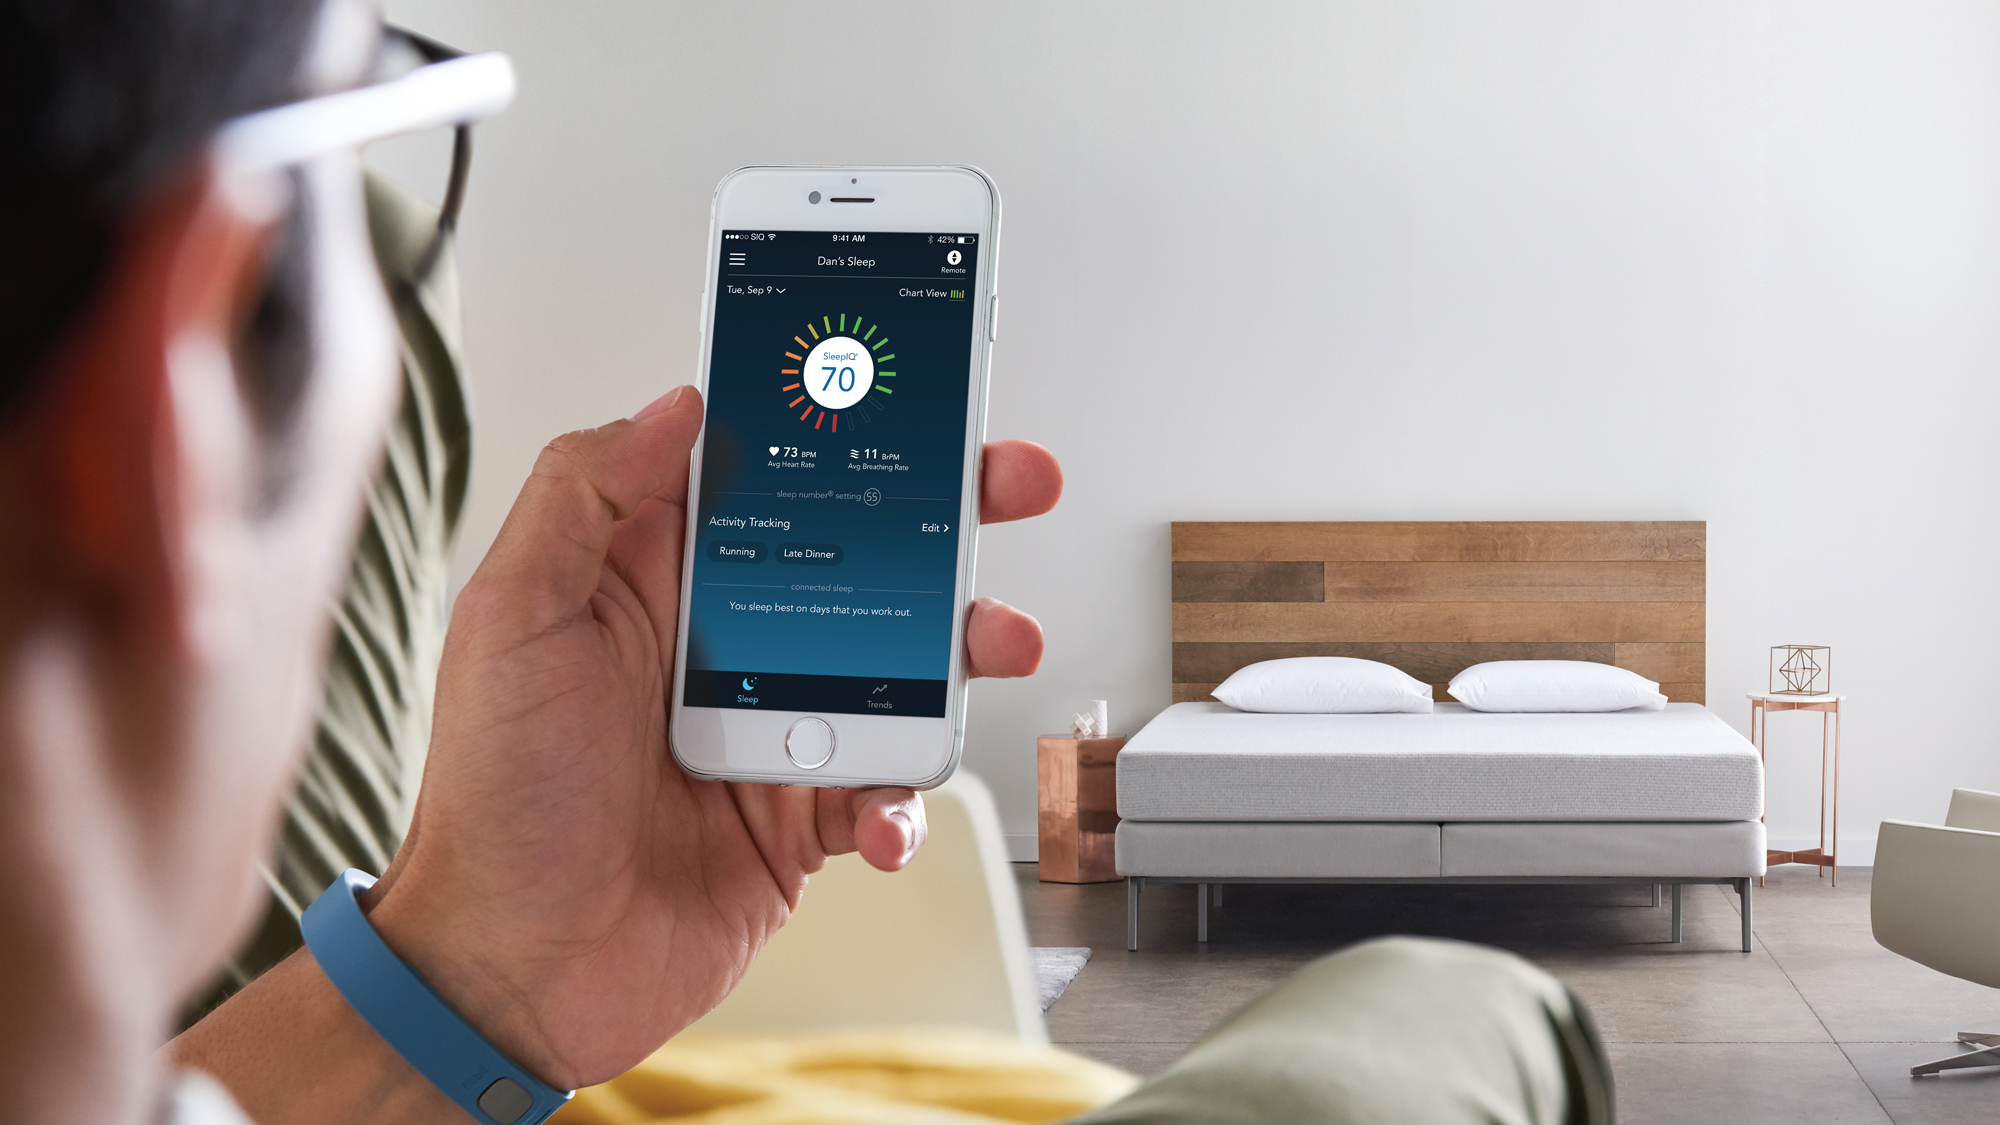 Sleep Number’s New Adjustable Mattress Ships In A Tiny Box